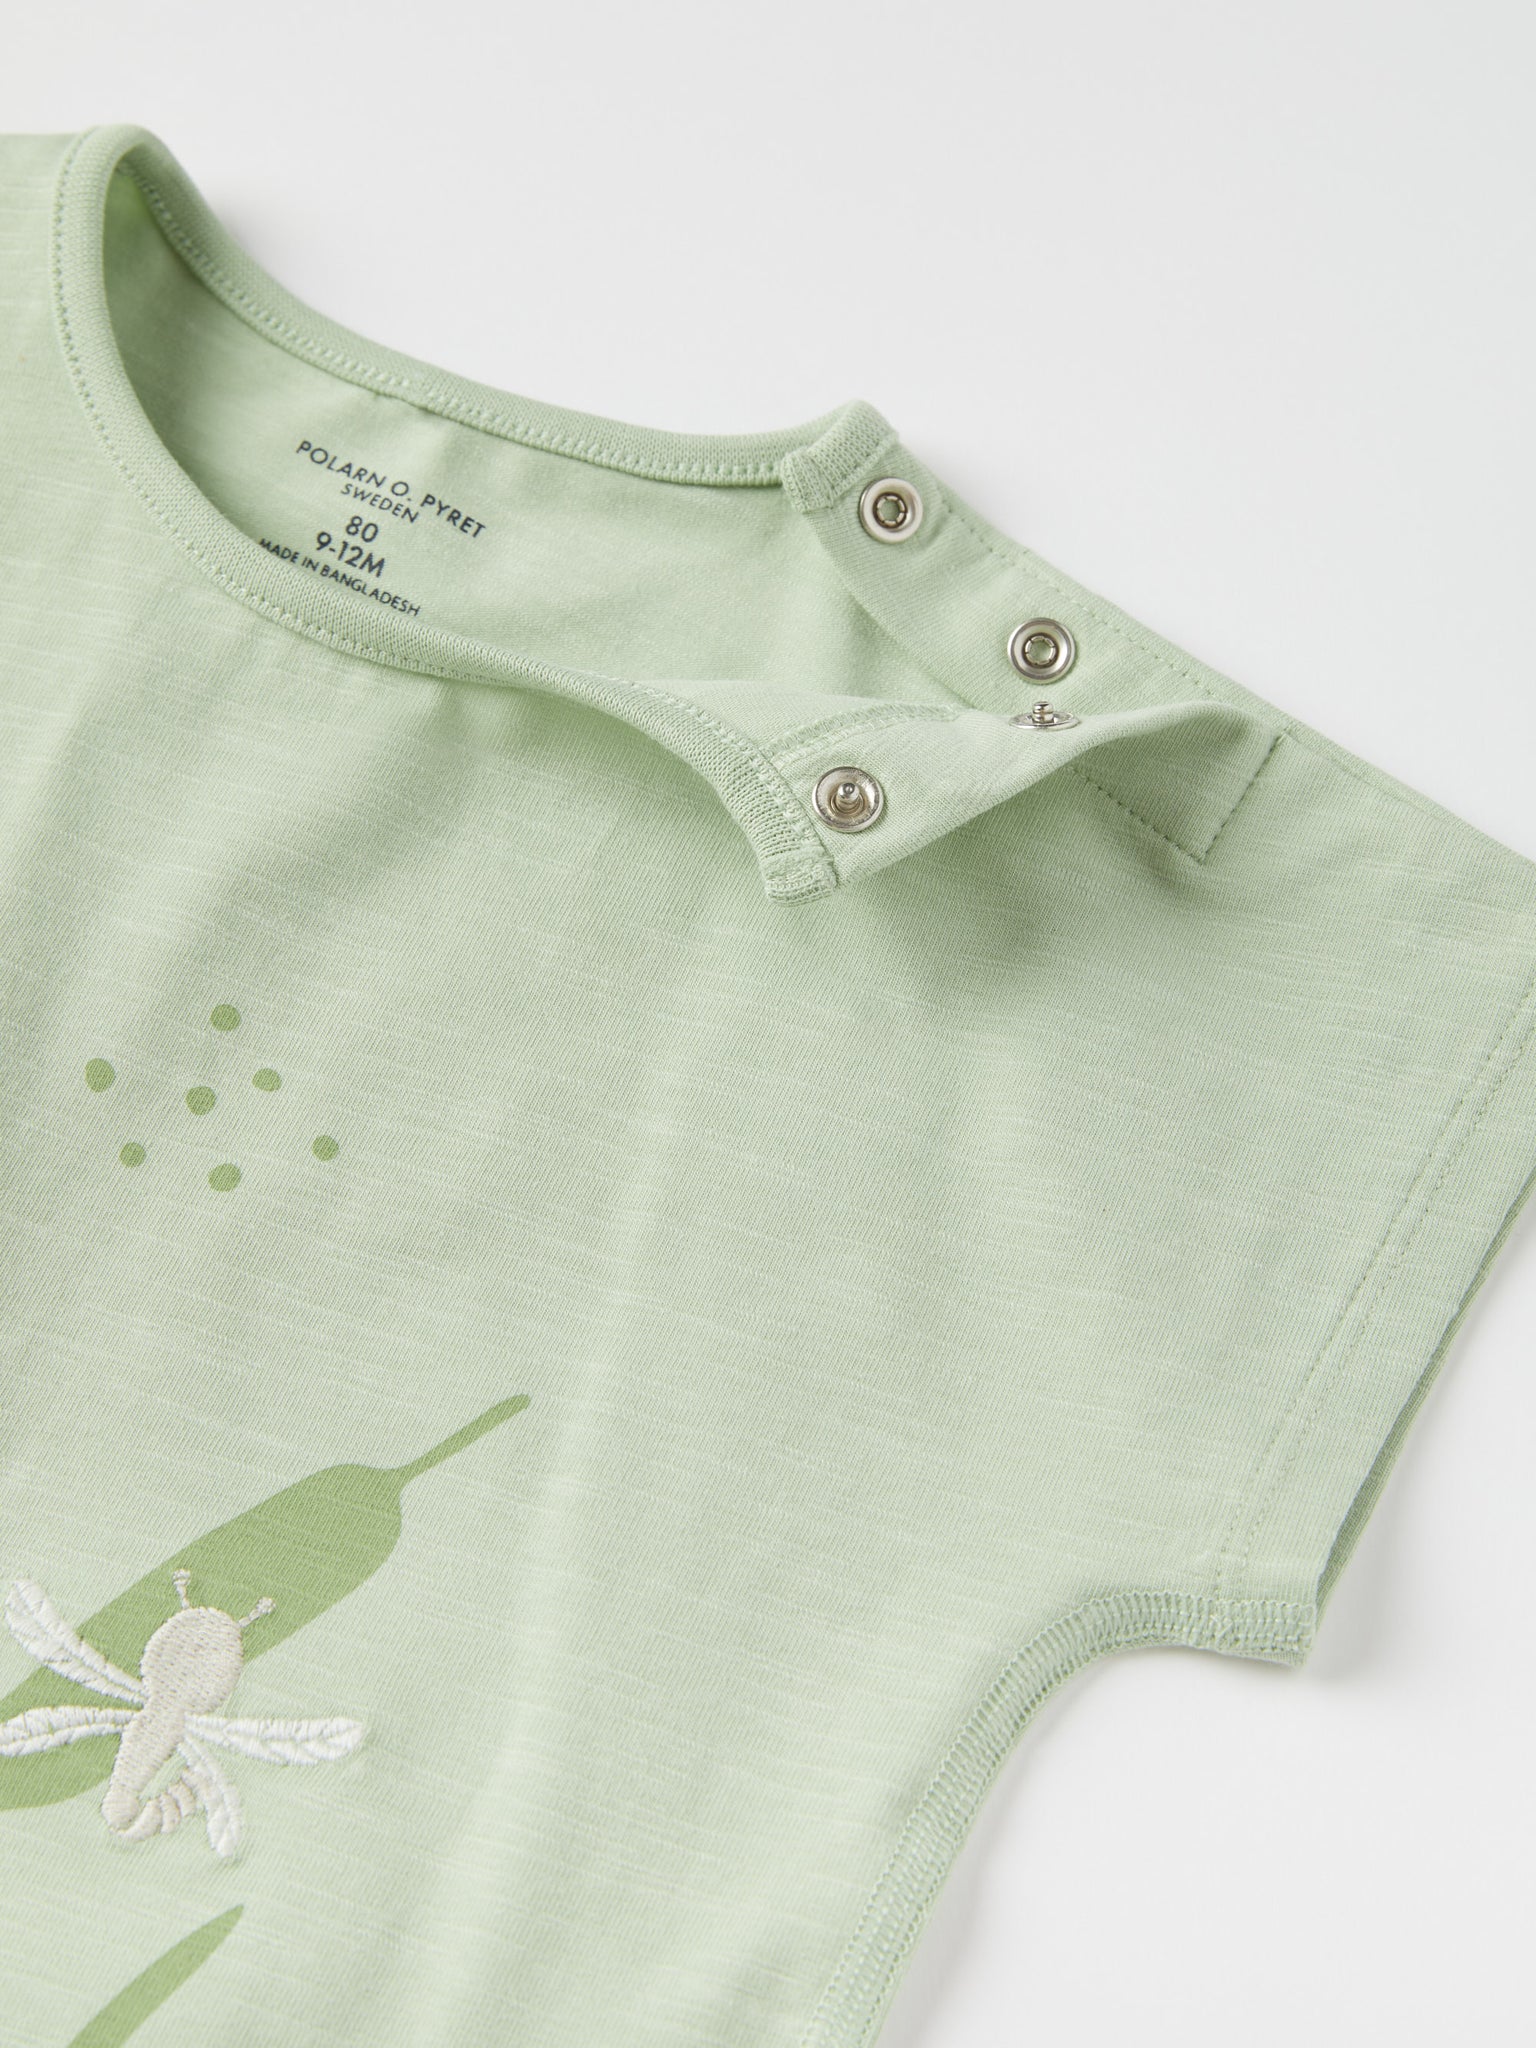 Dragonfly Embroidered T-Shirt from the Polarn O. Pyret baby collection. Nordic kids clothes made from sustainable sources.